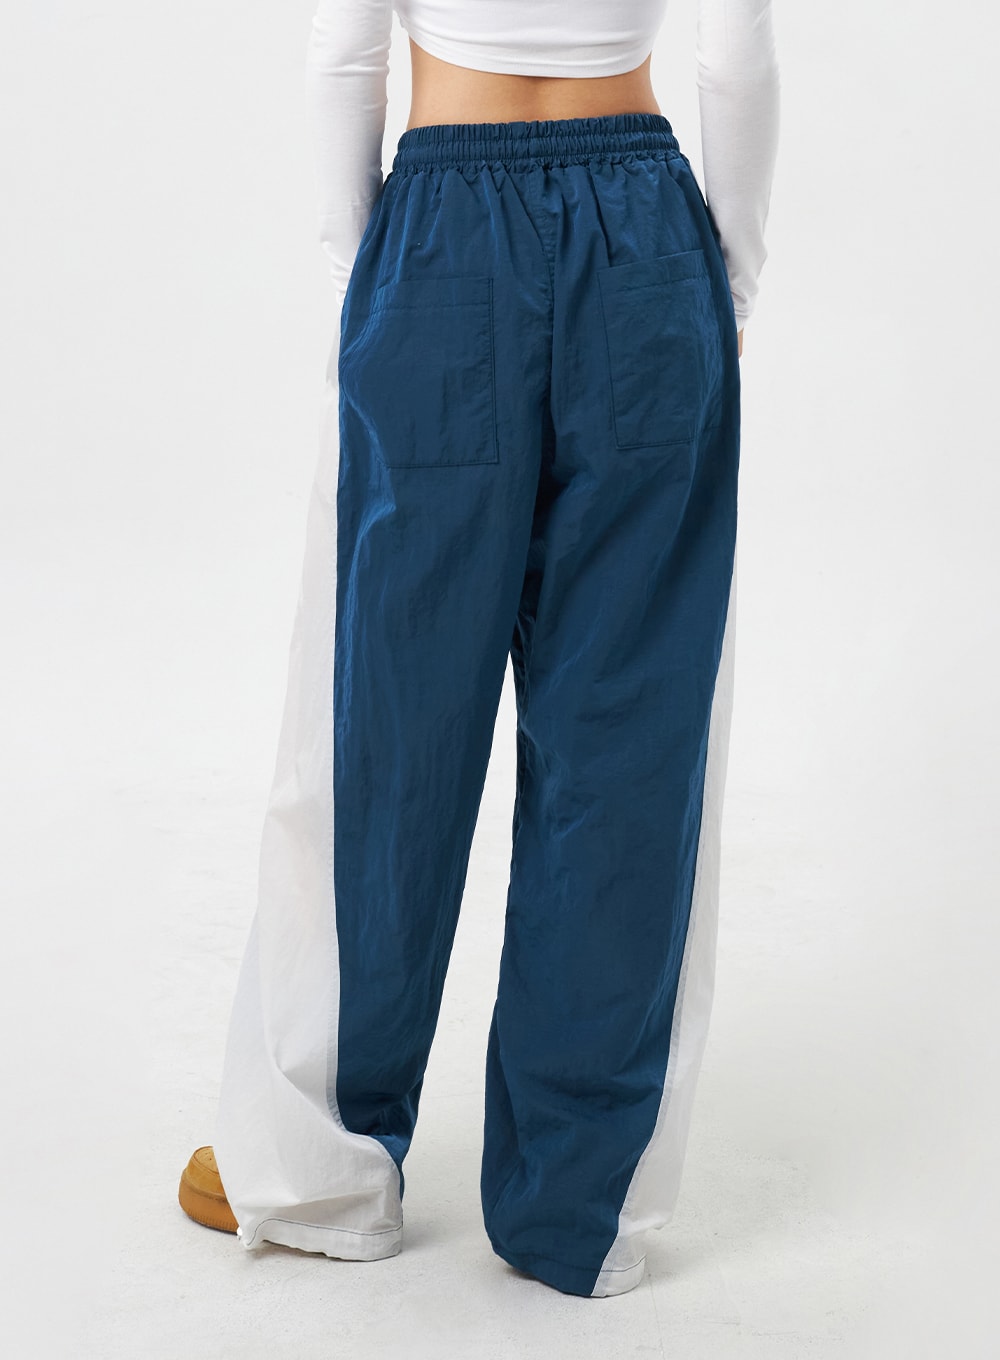 Two Color Track Pants Unisex CY308